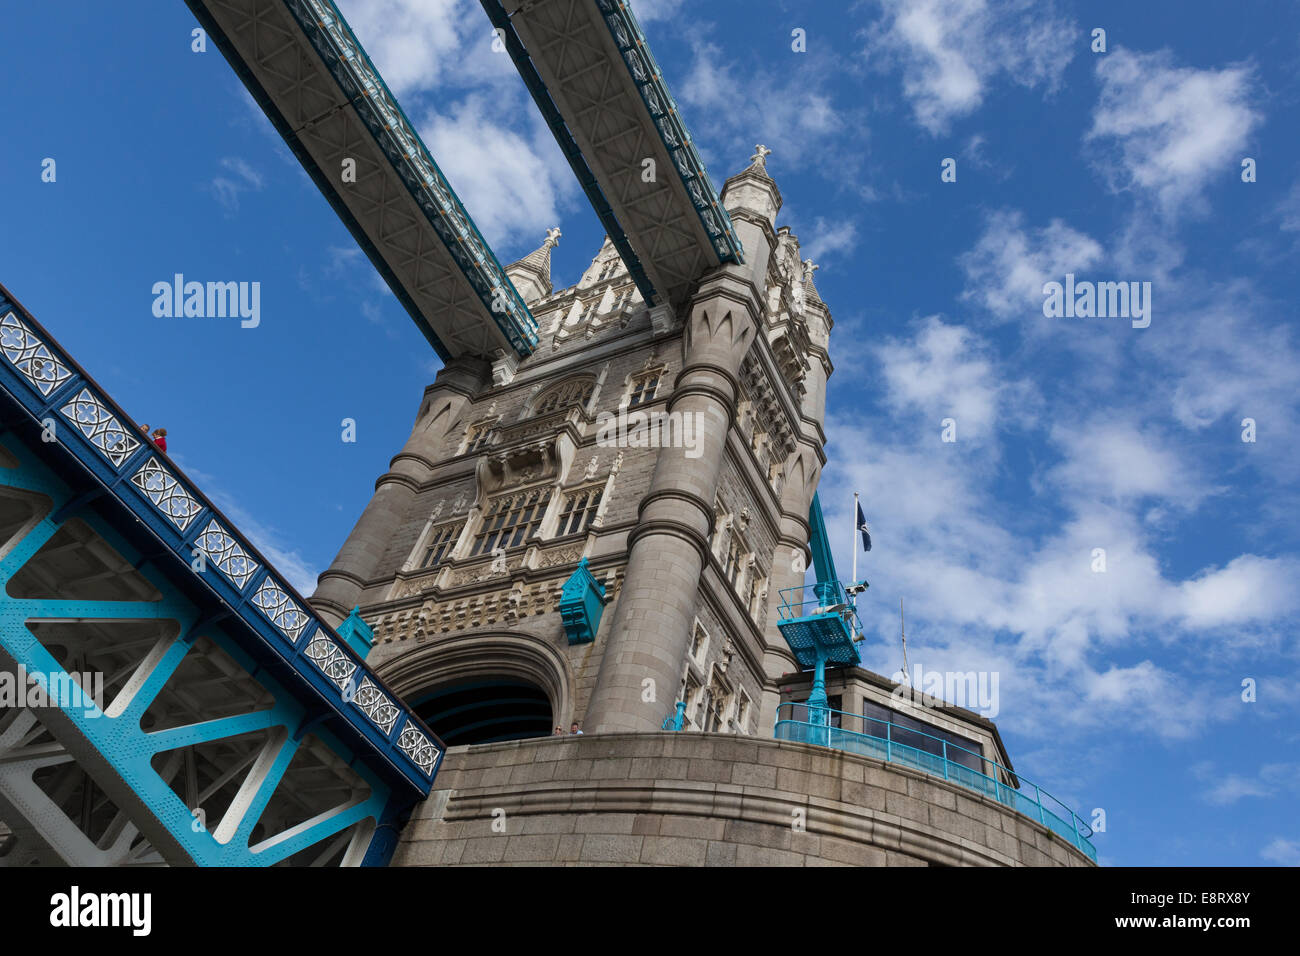 A view looking up from the river Thames of the iconic Tower Bridge in London, England, UK Stock Photo